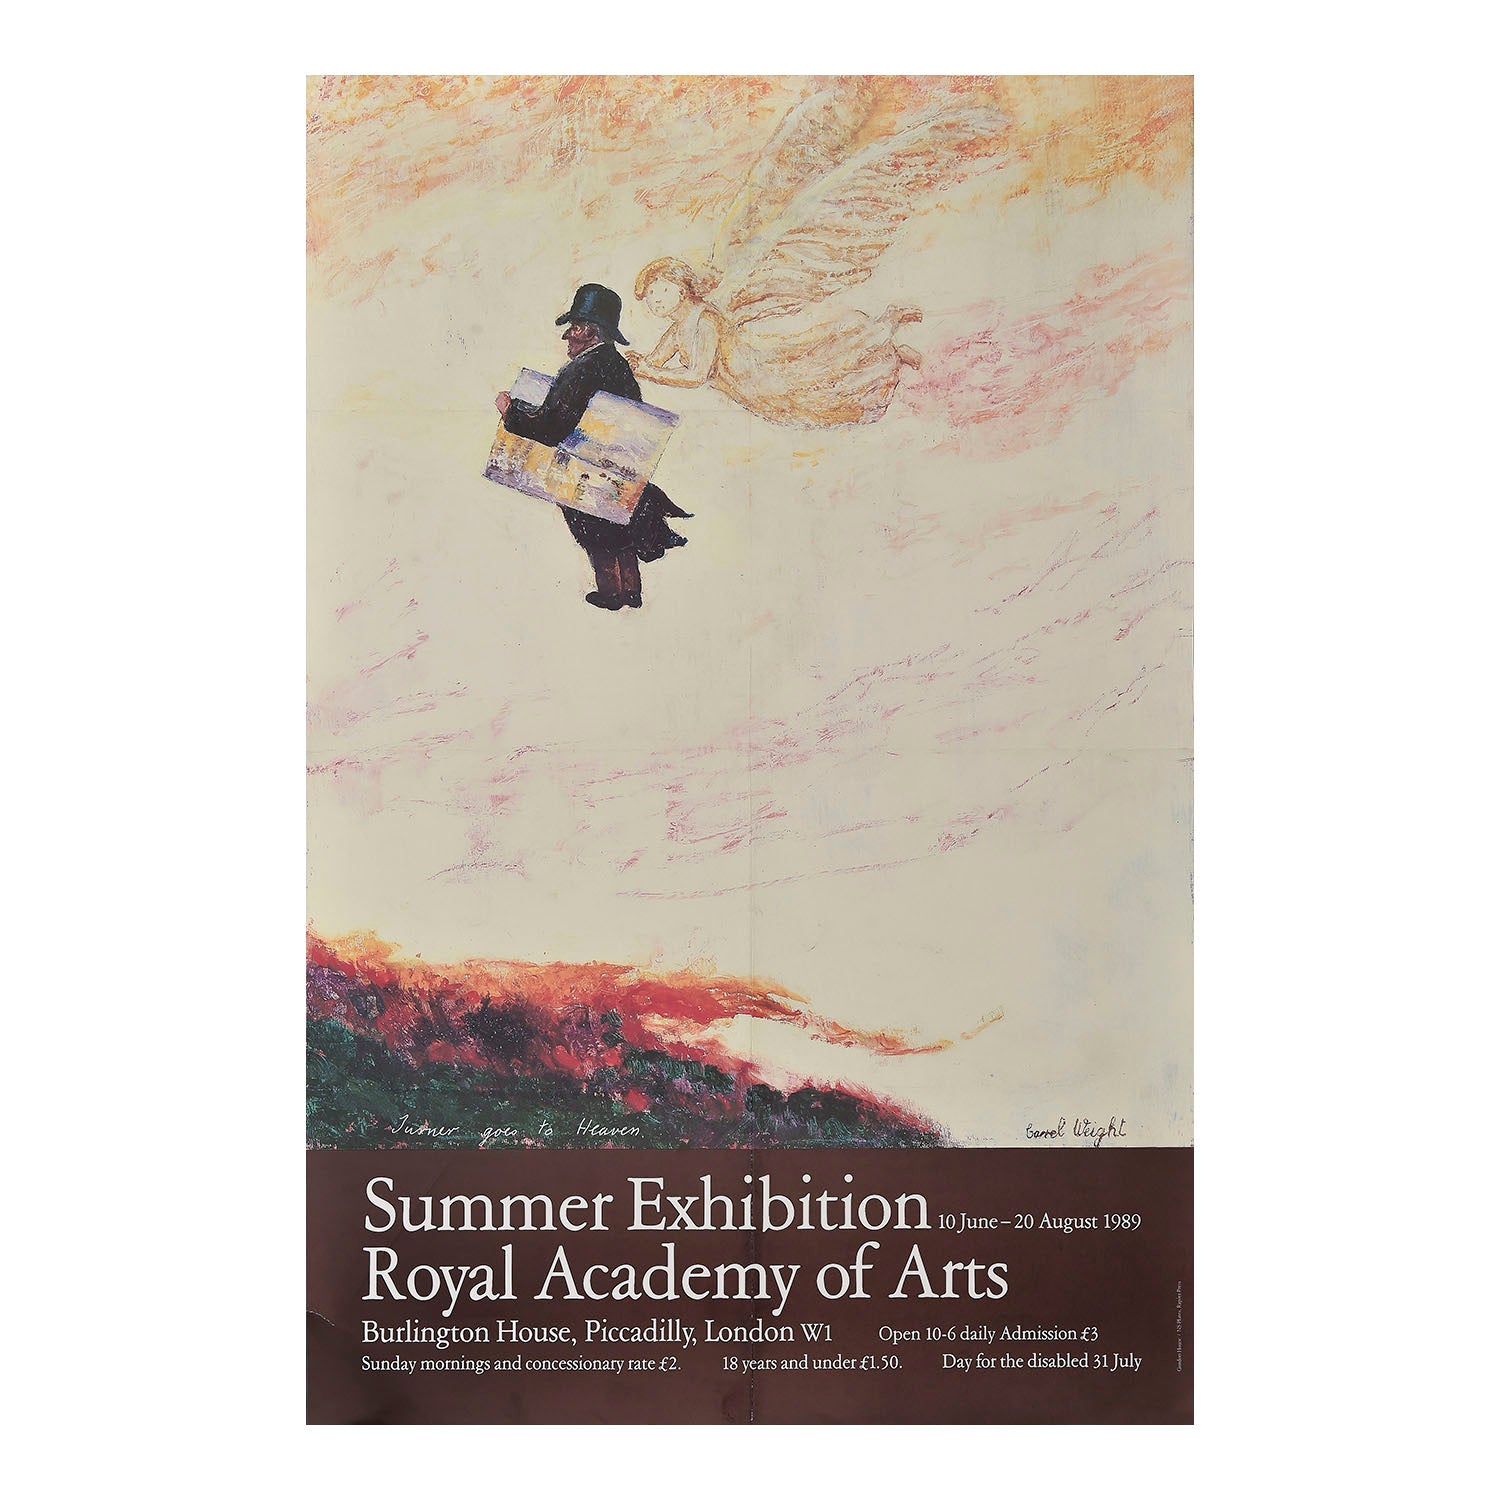 original poster, for the Royal Academy Summer Exhibition in 1989 featuring a painting by Carel Weight RA (1908-1997), Turner Goes to Heaven, with layout design by Gordon House